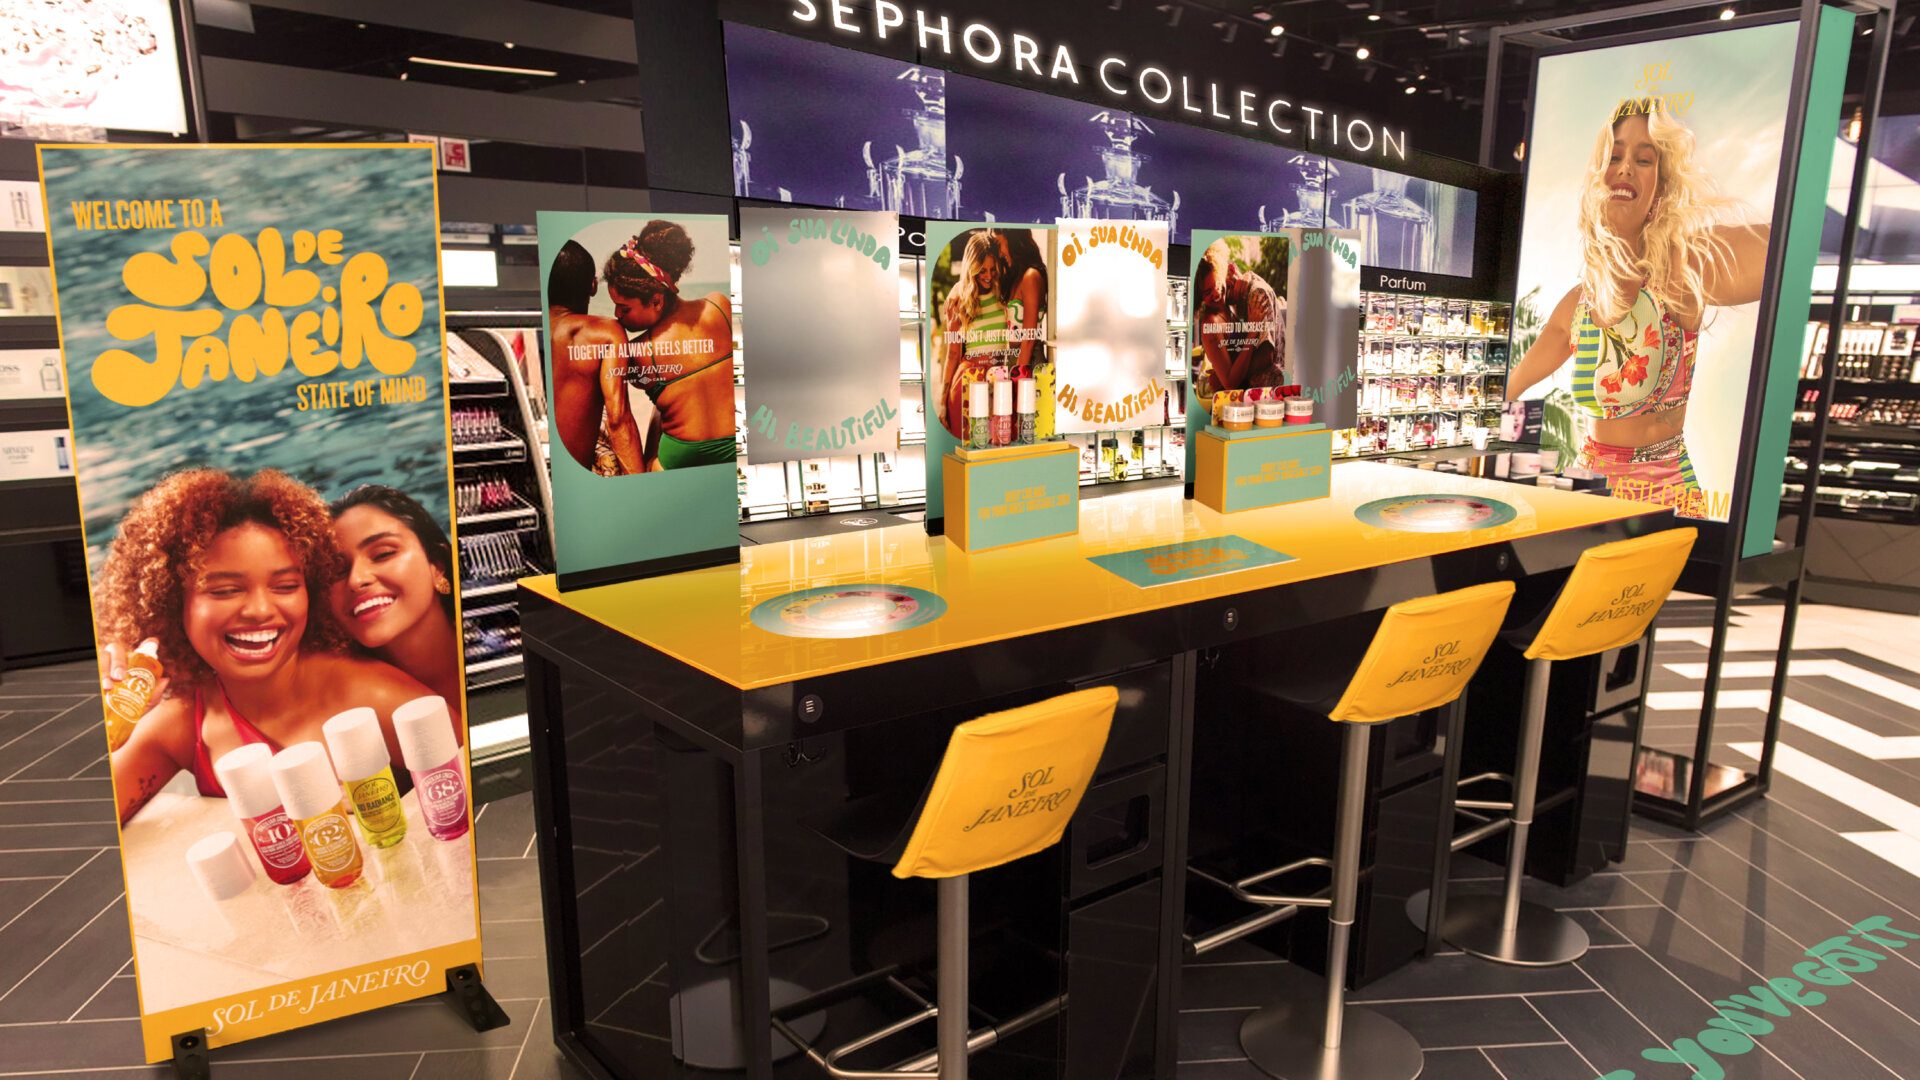 A Sol De Janeiro makeup counter in a sephora store. Freestanding banner on the left, mirror and counter graphics in the center, chairs with branded chair covers, and and branded graphics on the floor.